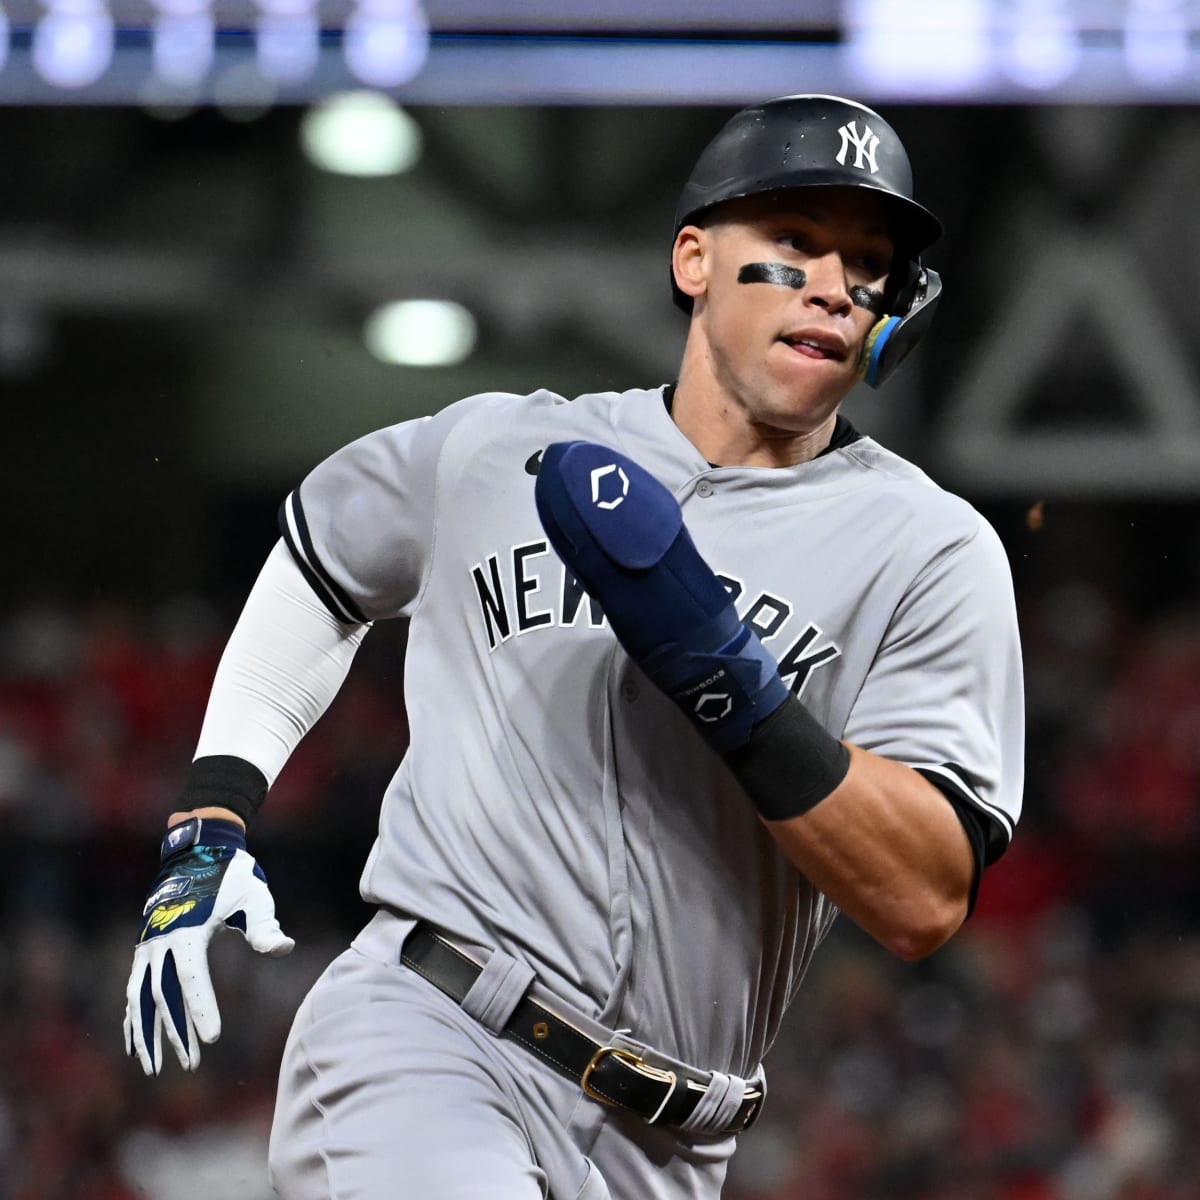 Does a Mookie Betts trade give insight into Aaron Judge's future?